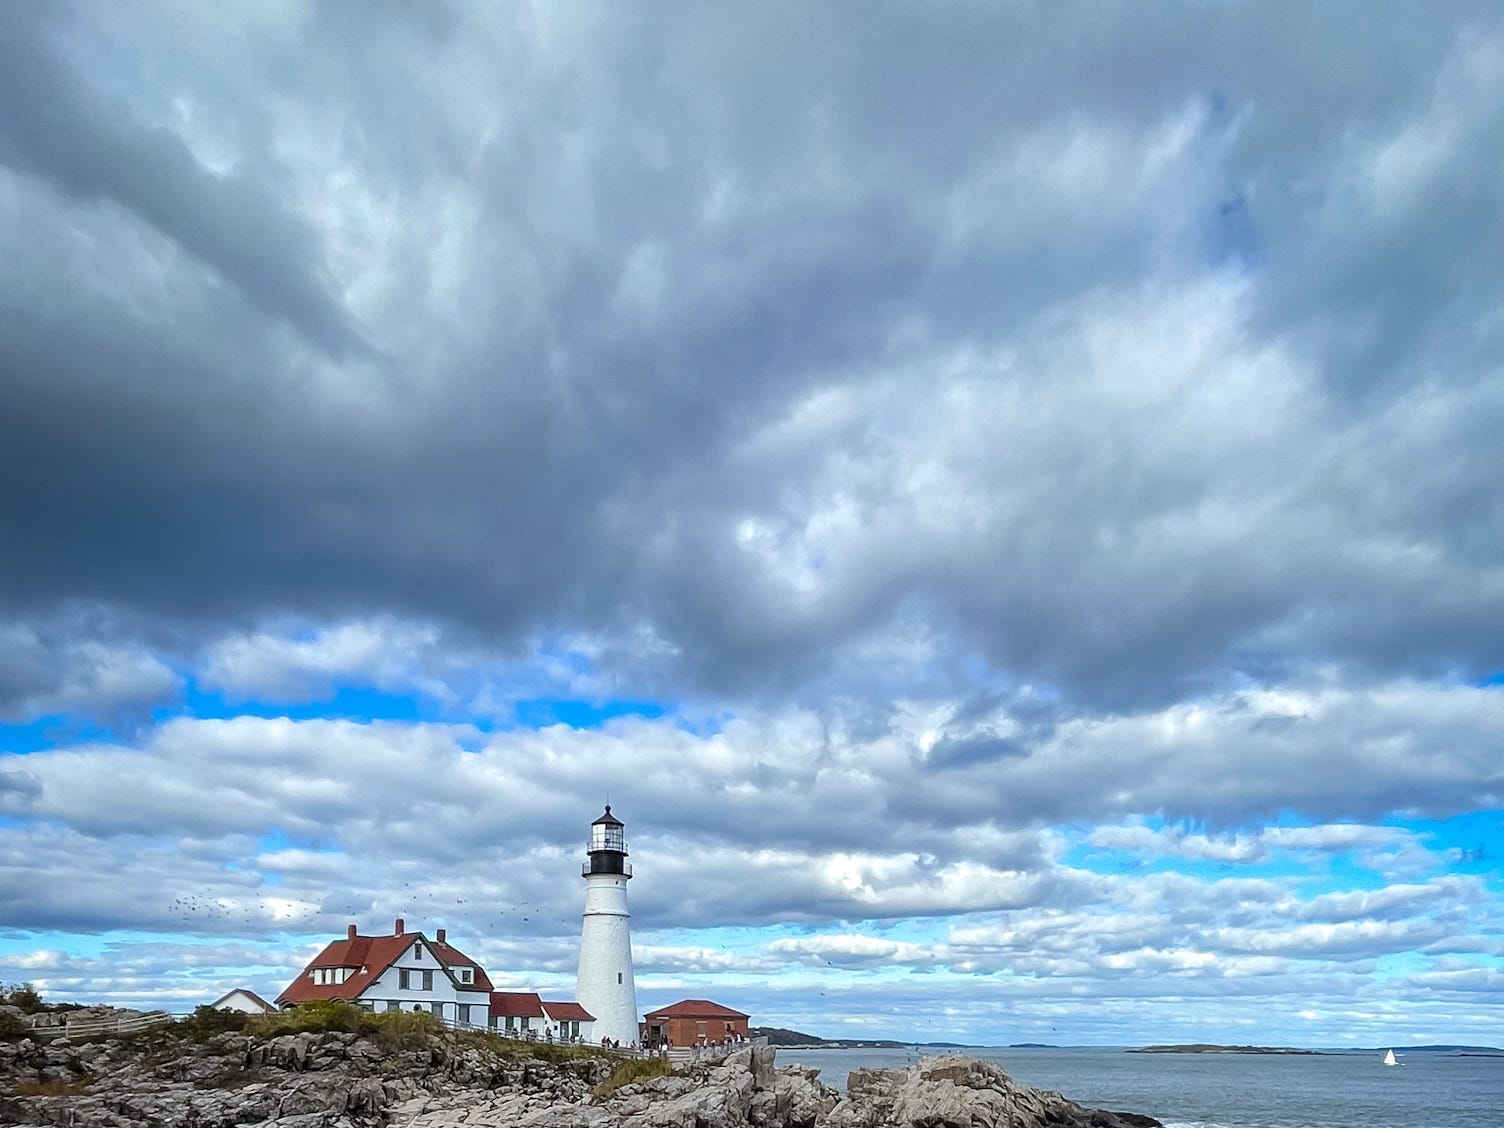 <p>There's so much to love about Maine, but my favorite part of the state is the coast. With jagged and dramatic cliffs, lighthouses, and lobster shacks, visiting the Maine coast is an unforgettable experience.</p><p>It's easy to find peace in the state that <a href="https://aa.usno.navy.mil/faq/first_sunrise">sees the first sunrise</a> of the year and is home to Acadia National Park, which is one of the country's <a class="" href="https://affiliate.insider.com?h=ba74a6da1b26c66a5c2e39cad0e127a98854cfcfcbcdb7a4184dae07a026e335&platform=msn_reviews&postID=660b1e45669ae113e1c95519&postSlug=best-us-states-to-visit-according-to-frequent-traveler&site=bi&u=https%3A%2F%2Fwww.nationalgeographic.com%2Ftravel%2Fnational-parks%2Farticle%2Fmost-visited-parks-photos&utm_source=msn_reviews">most popular</a> national parks.</p><p>I love to road trip up the coast, stopping in beautiful towns like Kennebunkport, Bar Harbour, and Lubec.</p>